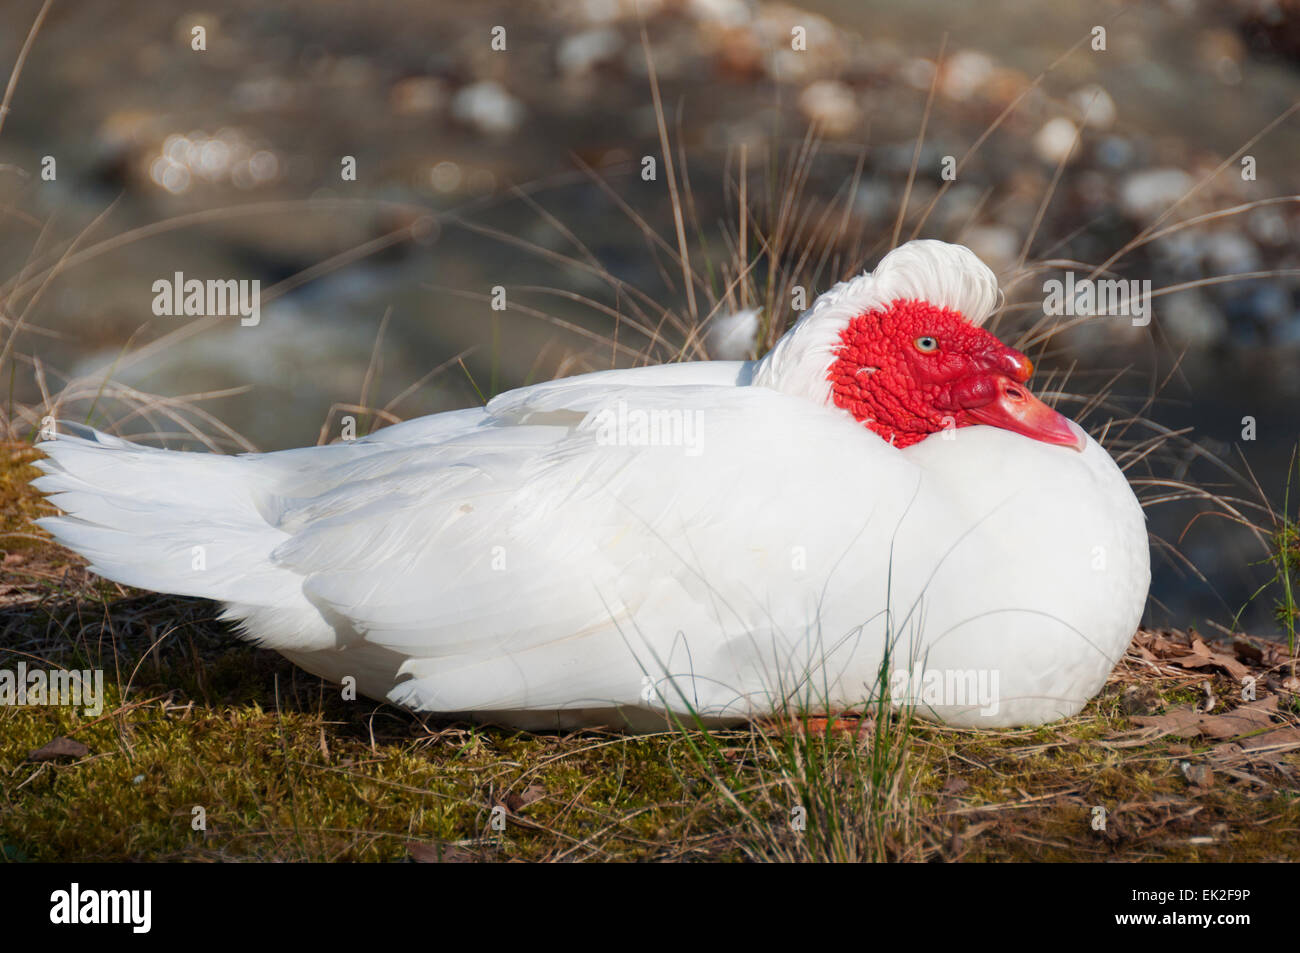 A white Muscovy duck with red face sitting on the ground Stock Photo